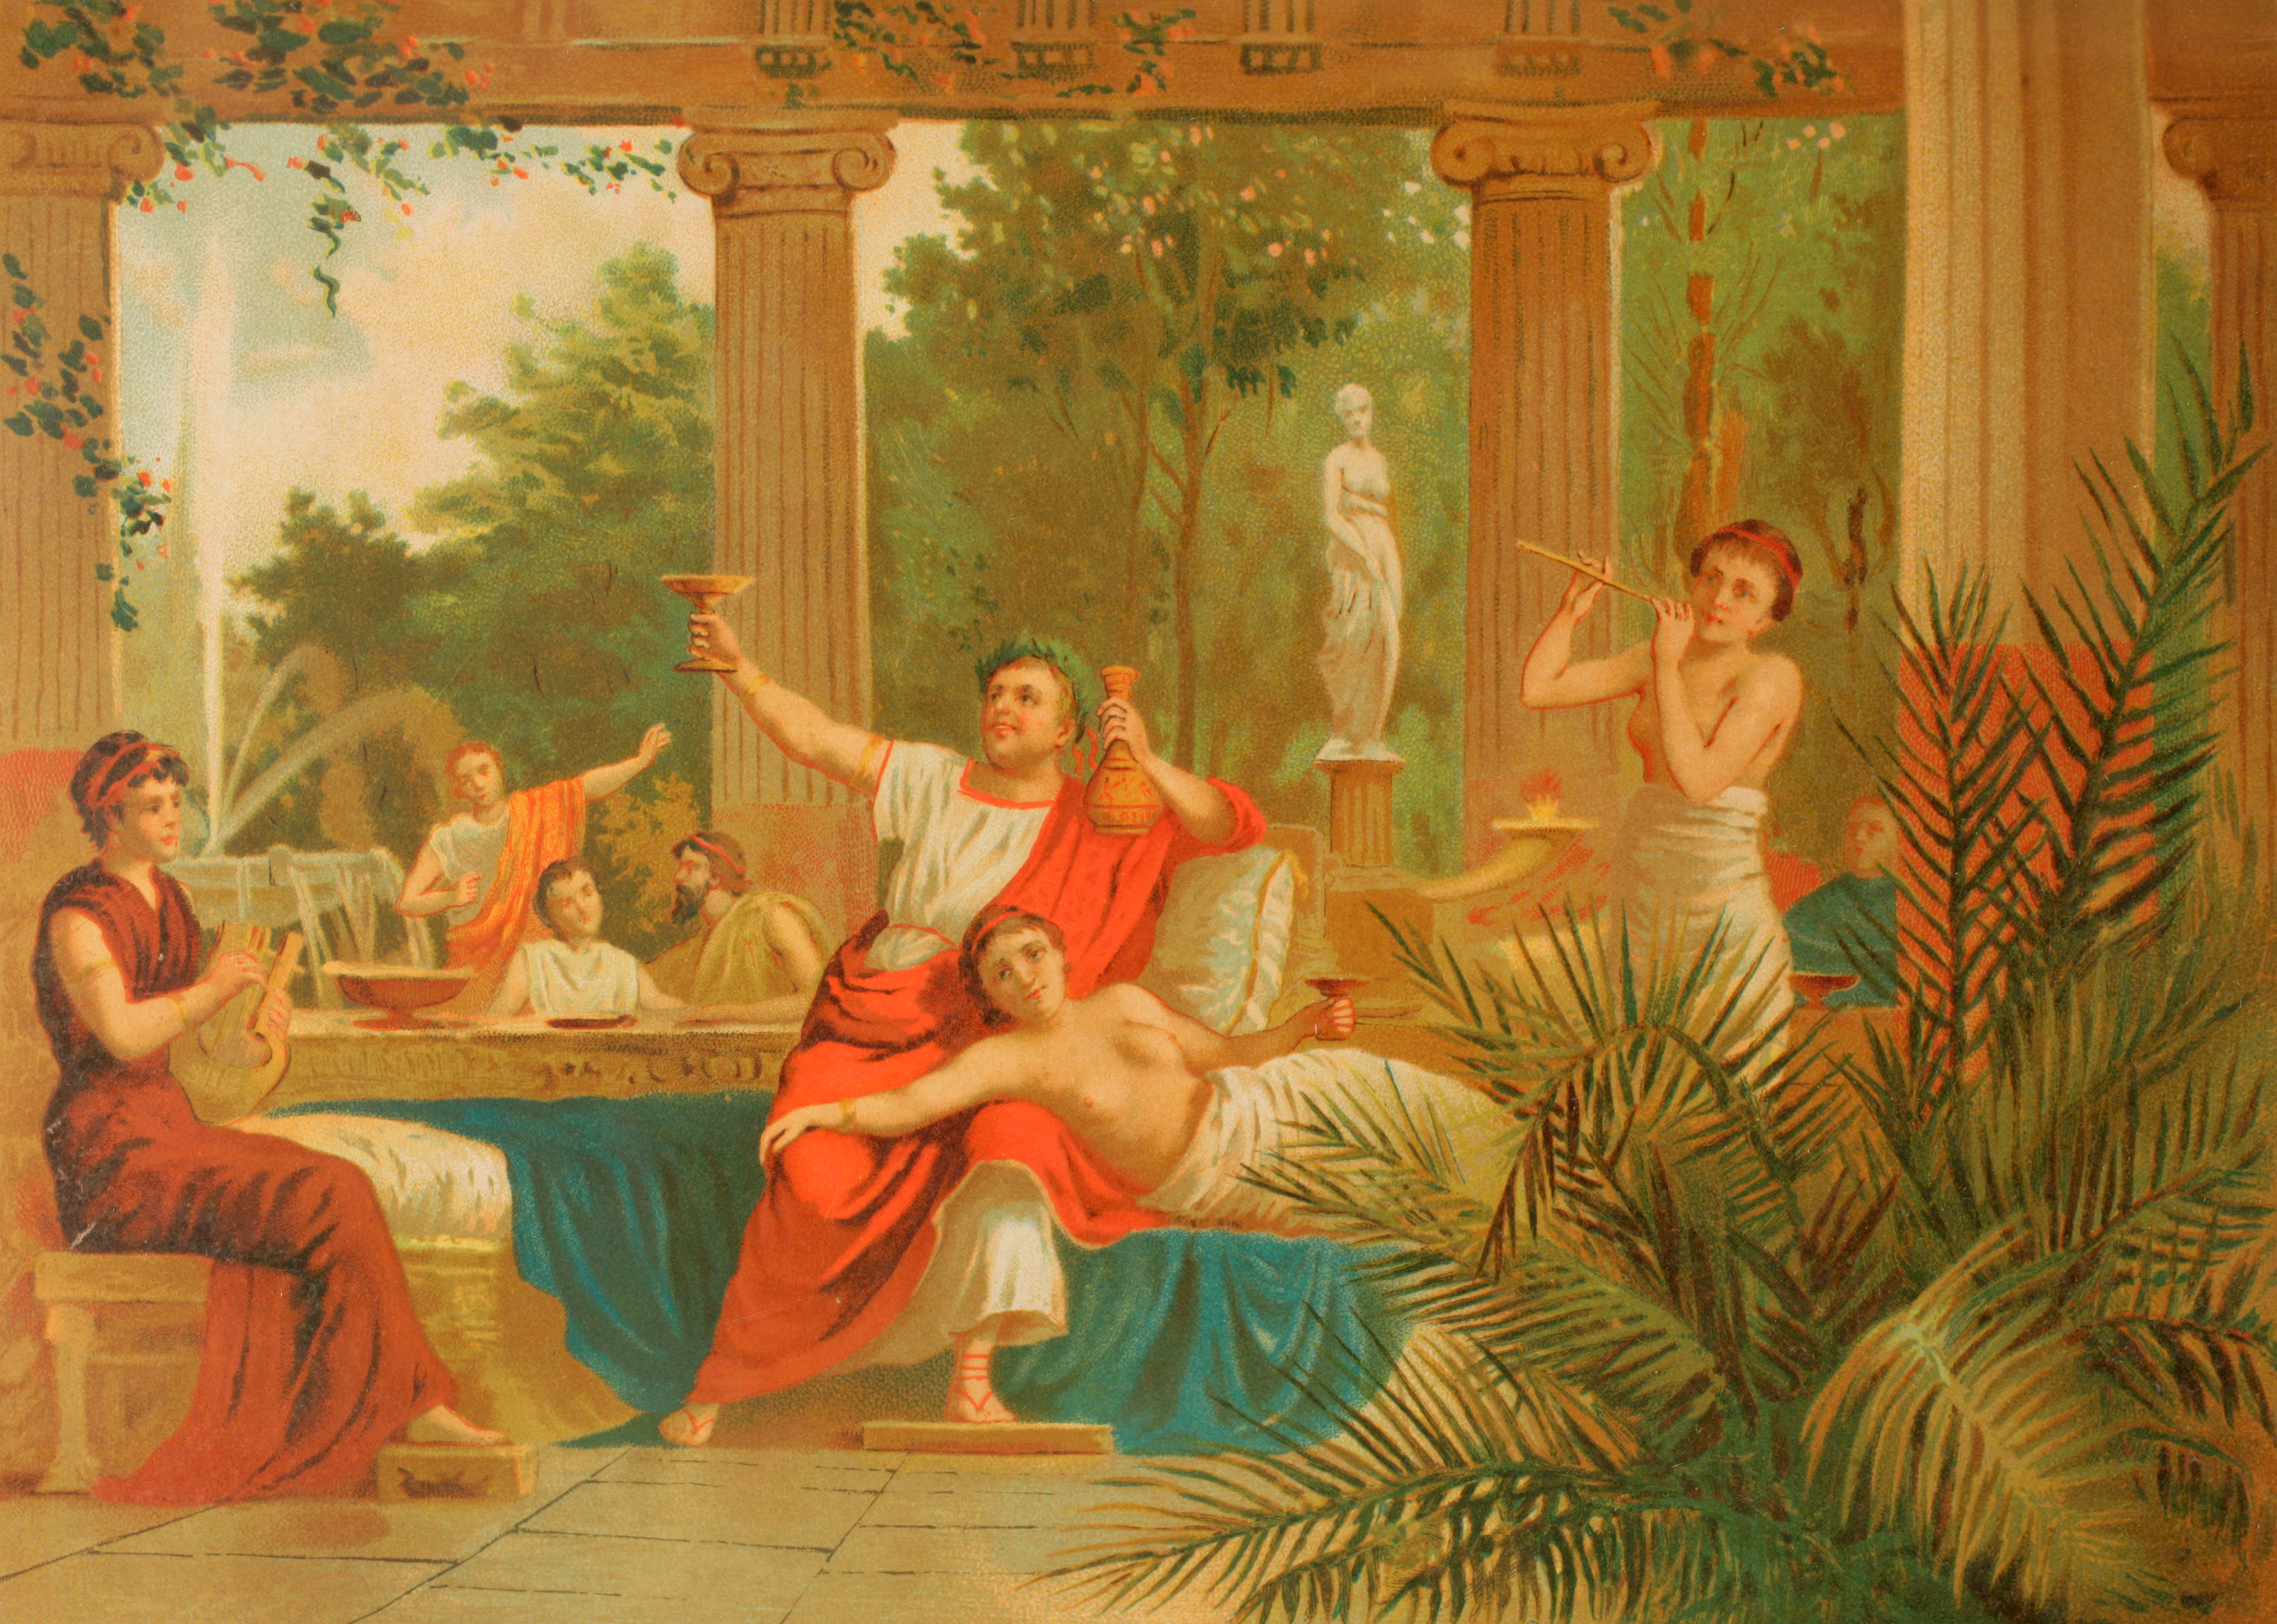 Ancient Rome: An Unknown History of Alcohol (7 Facts)